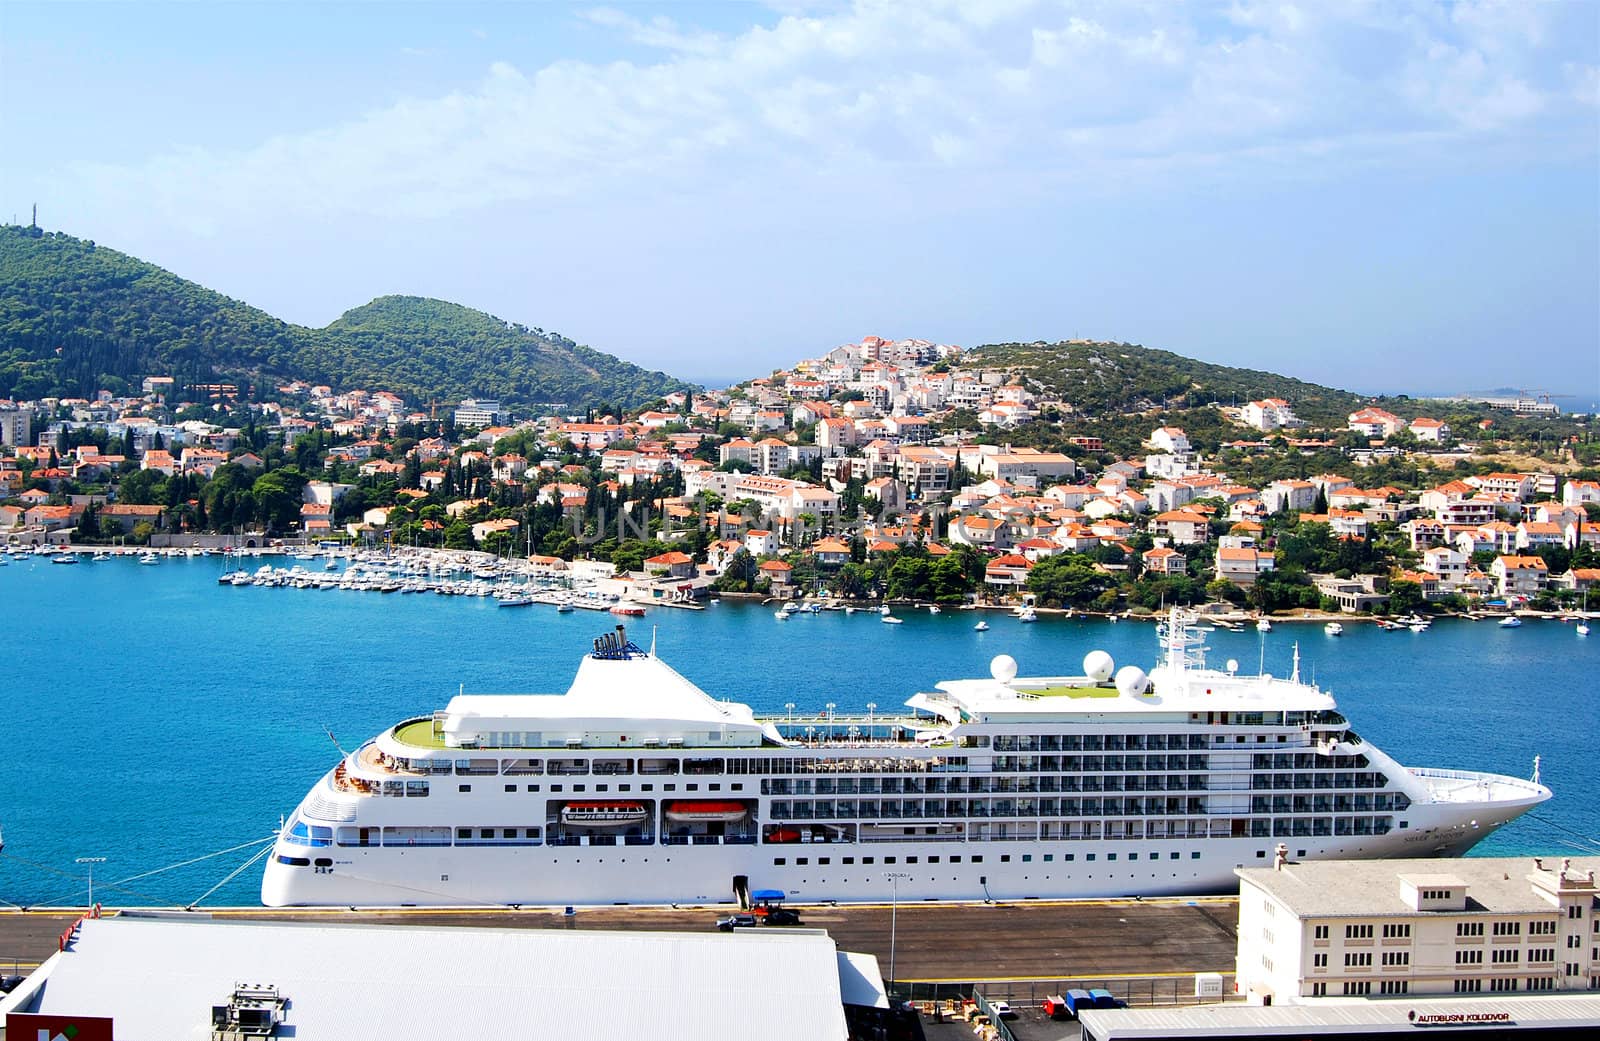 Large cruise ship in old Mediterranean town harbour